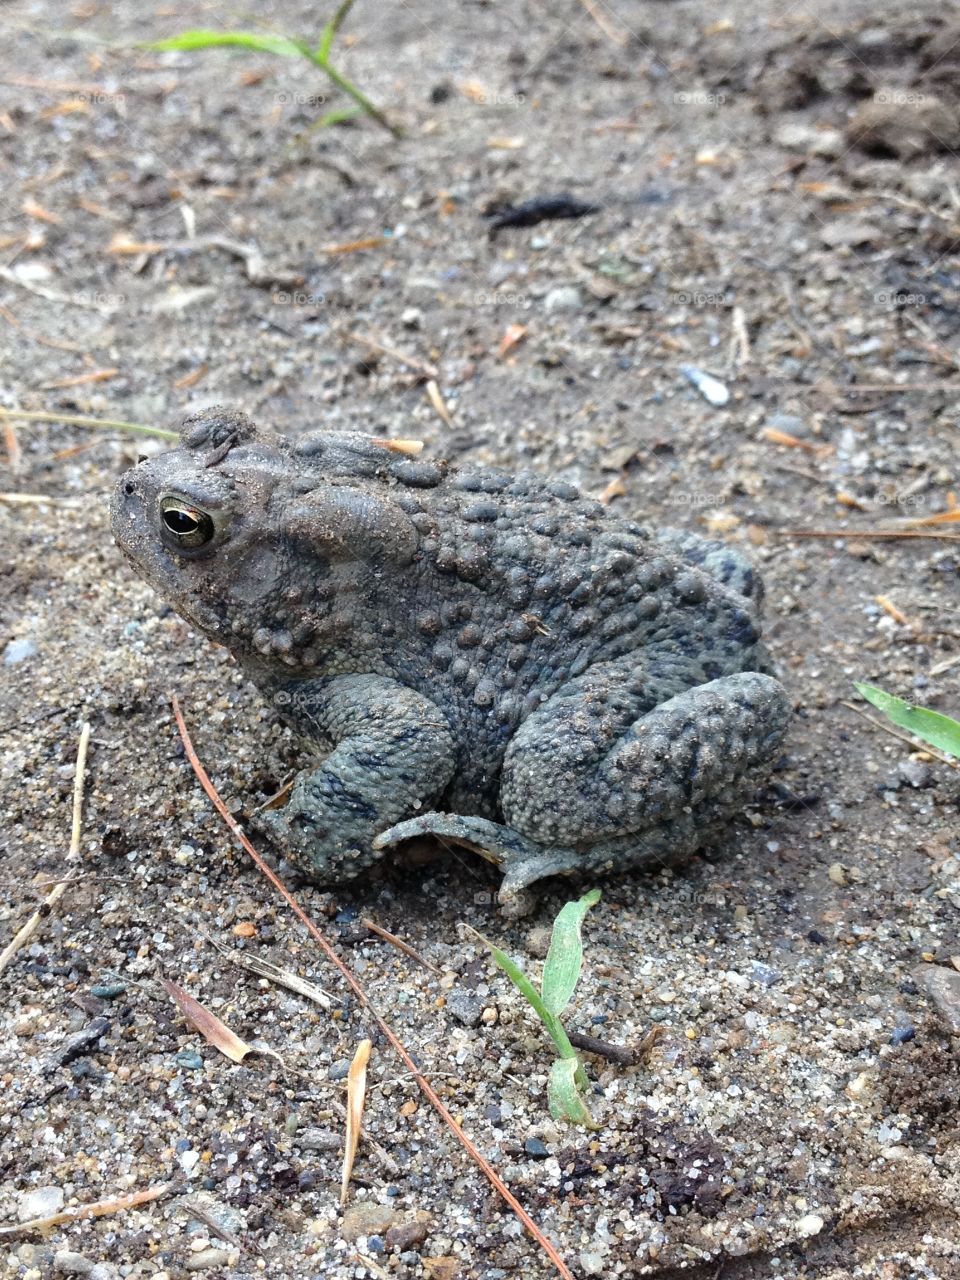 Toad, frog in profile on dirt, detailed.